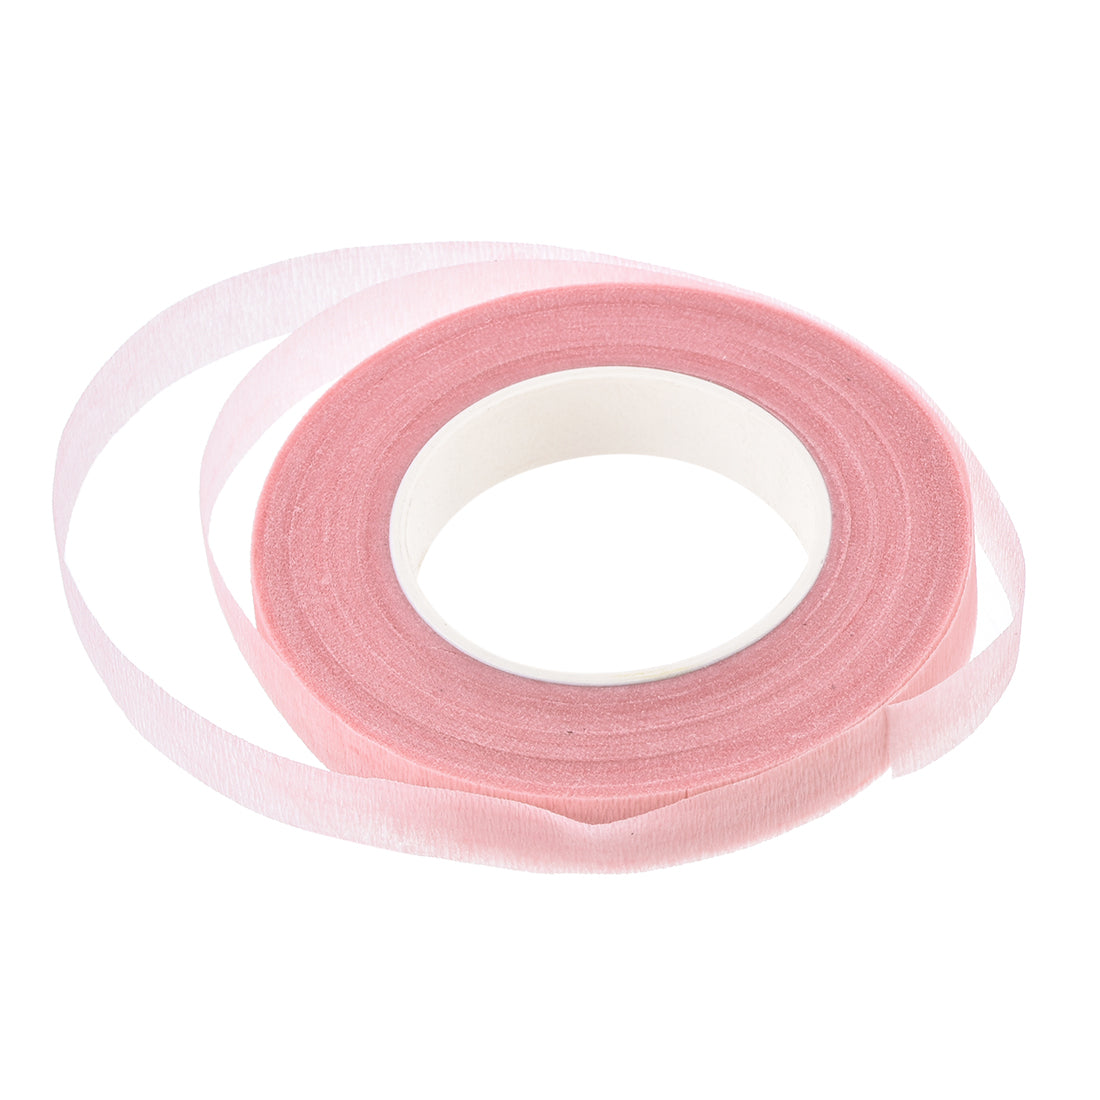 uxcell Uxcell 1Roll 1/2"x30Yard Pink Floral Tape Flower Adhesives Floral Arrangement Kit